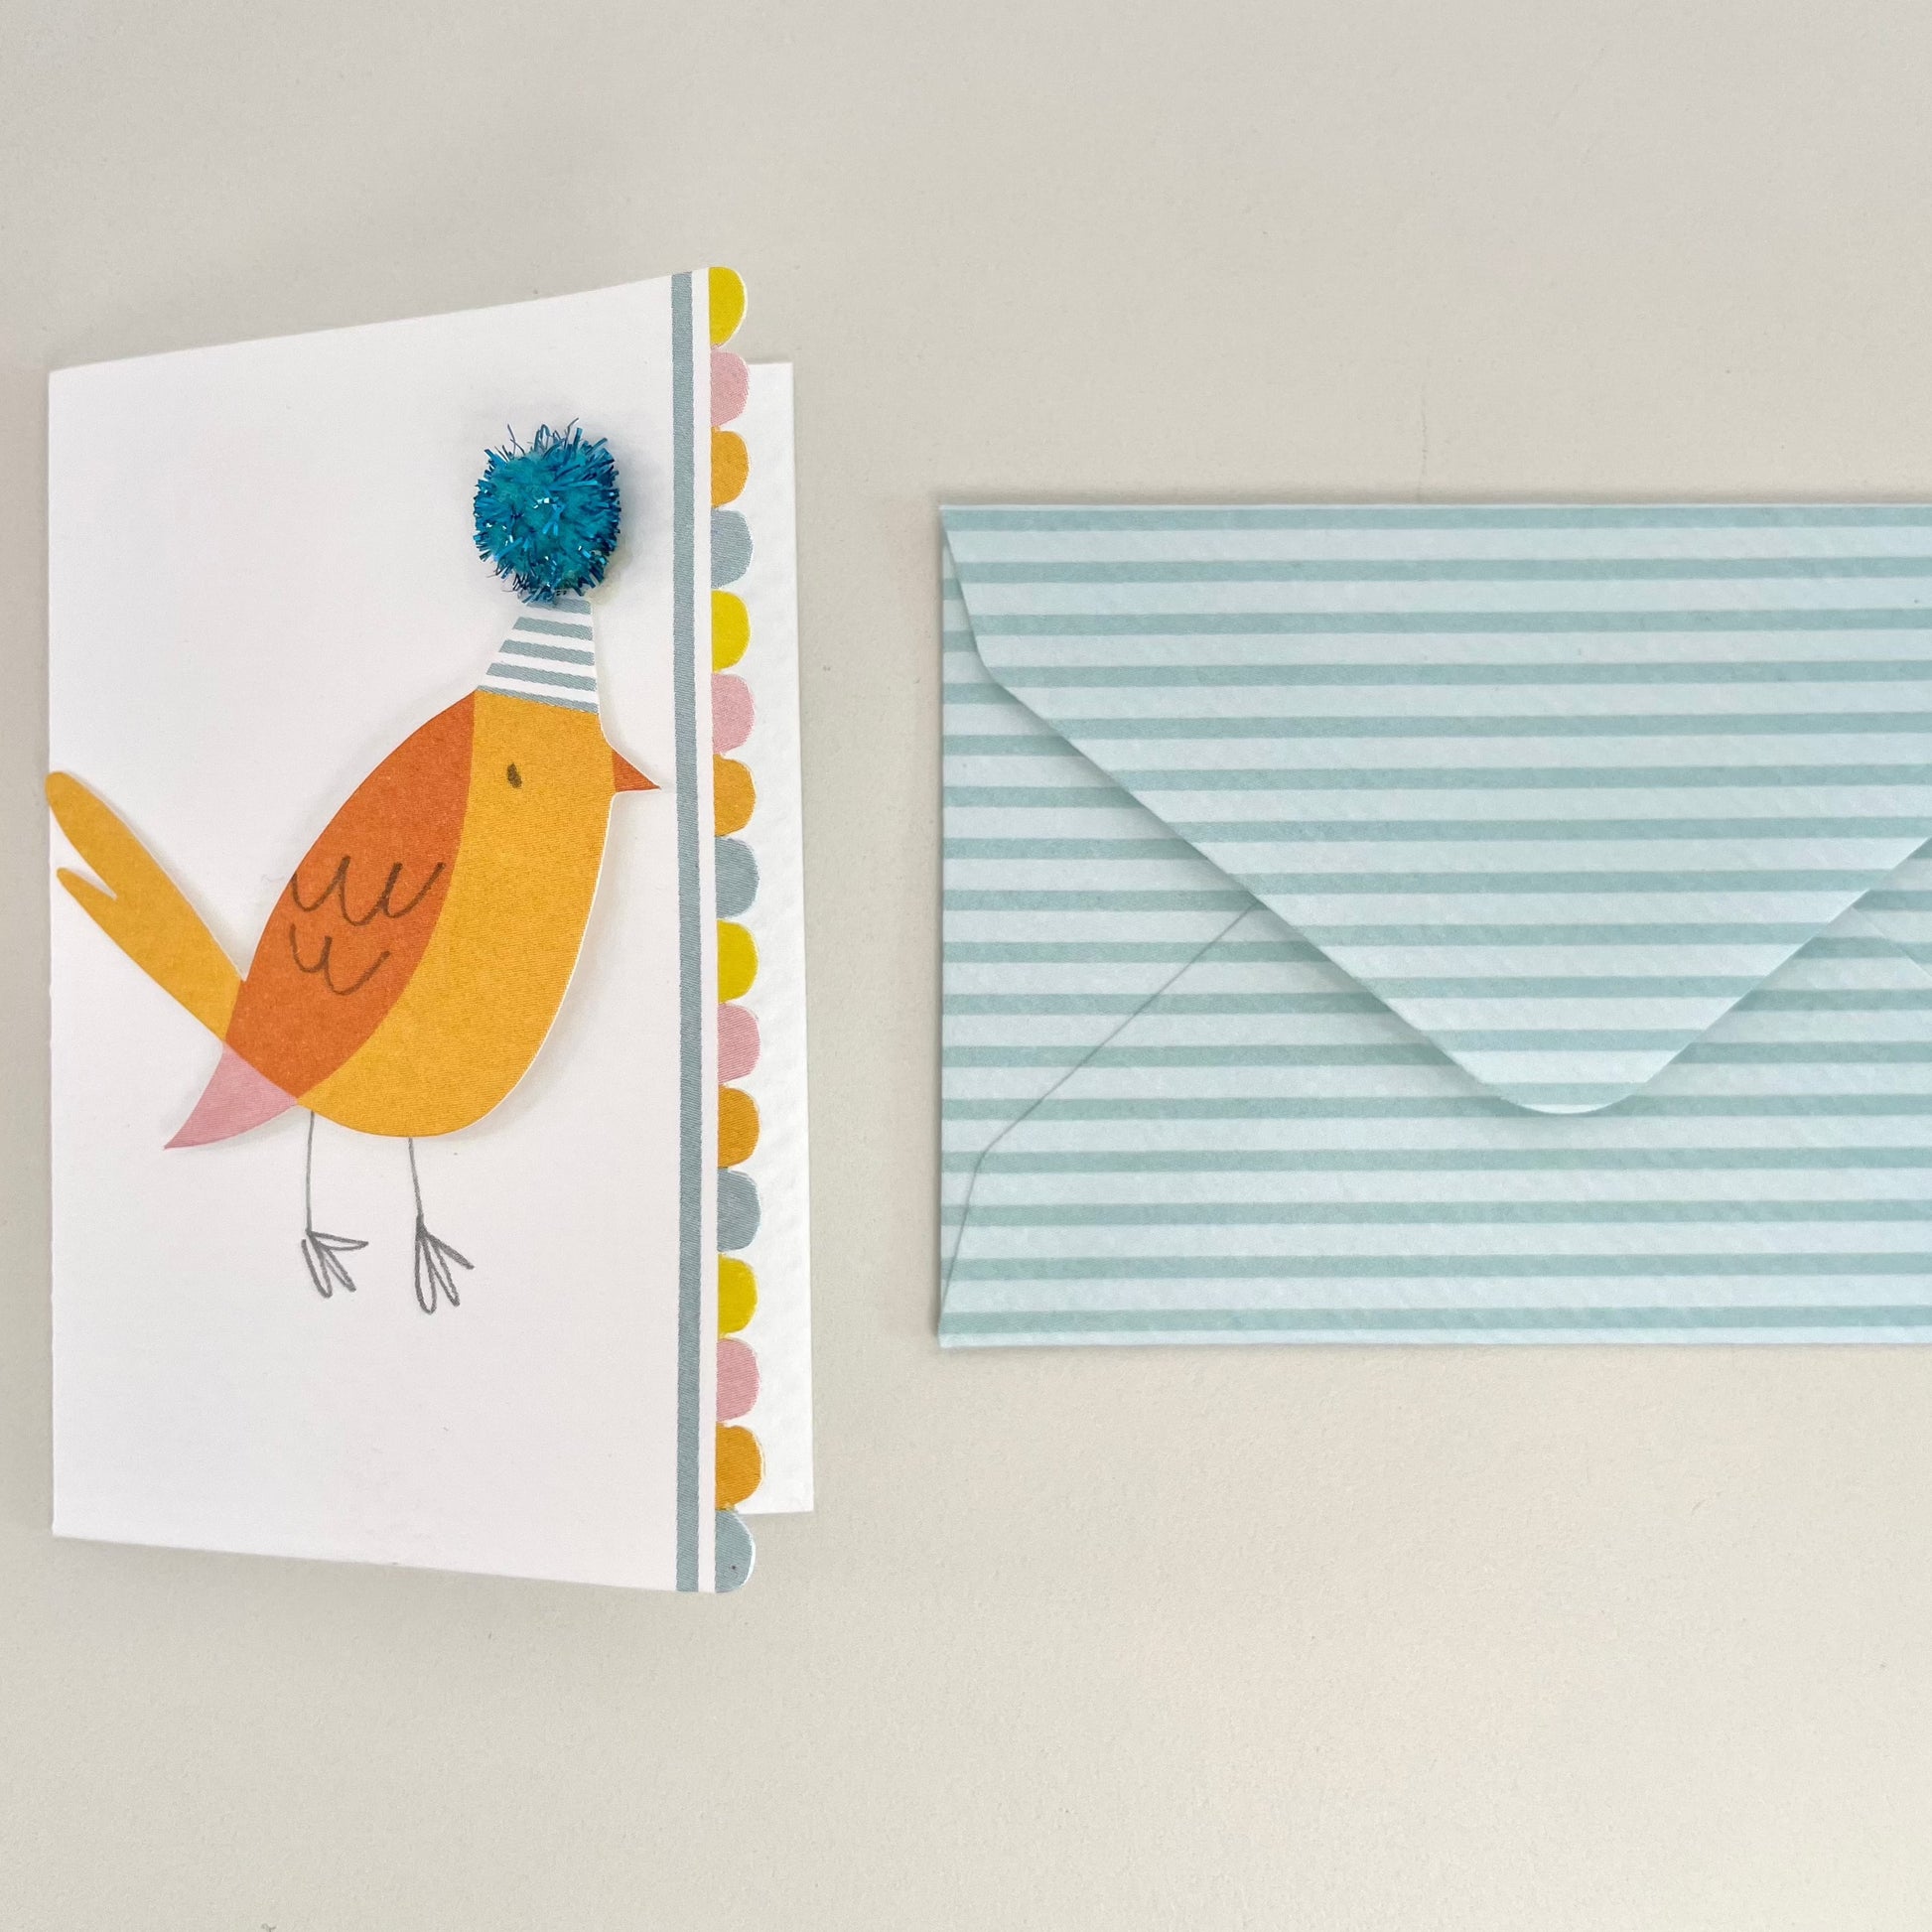 3D mini paper bird gift enclosure card with glitter pompom party hat and striped envelope